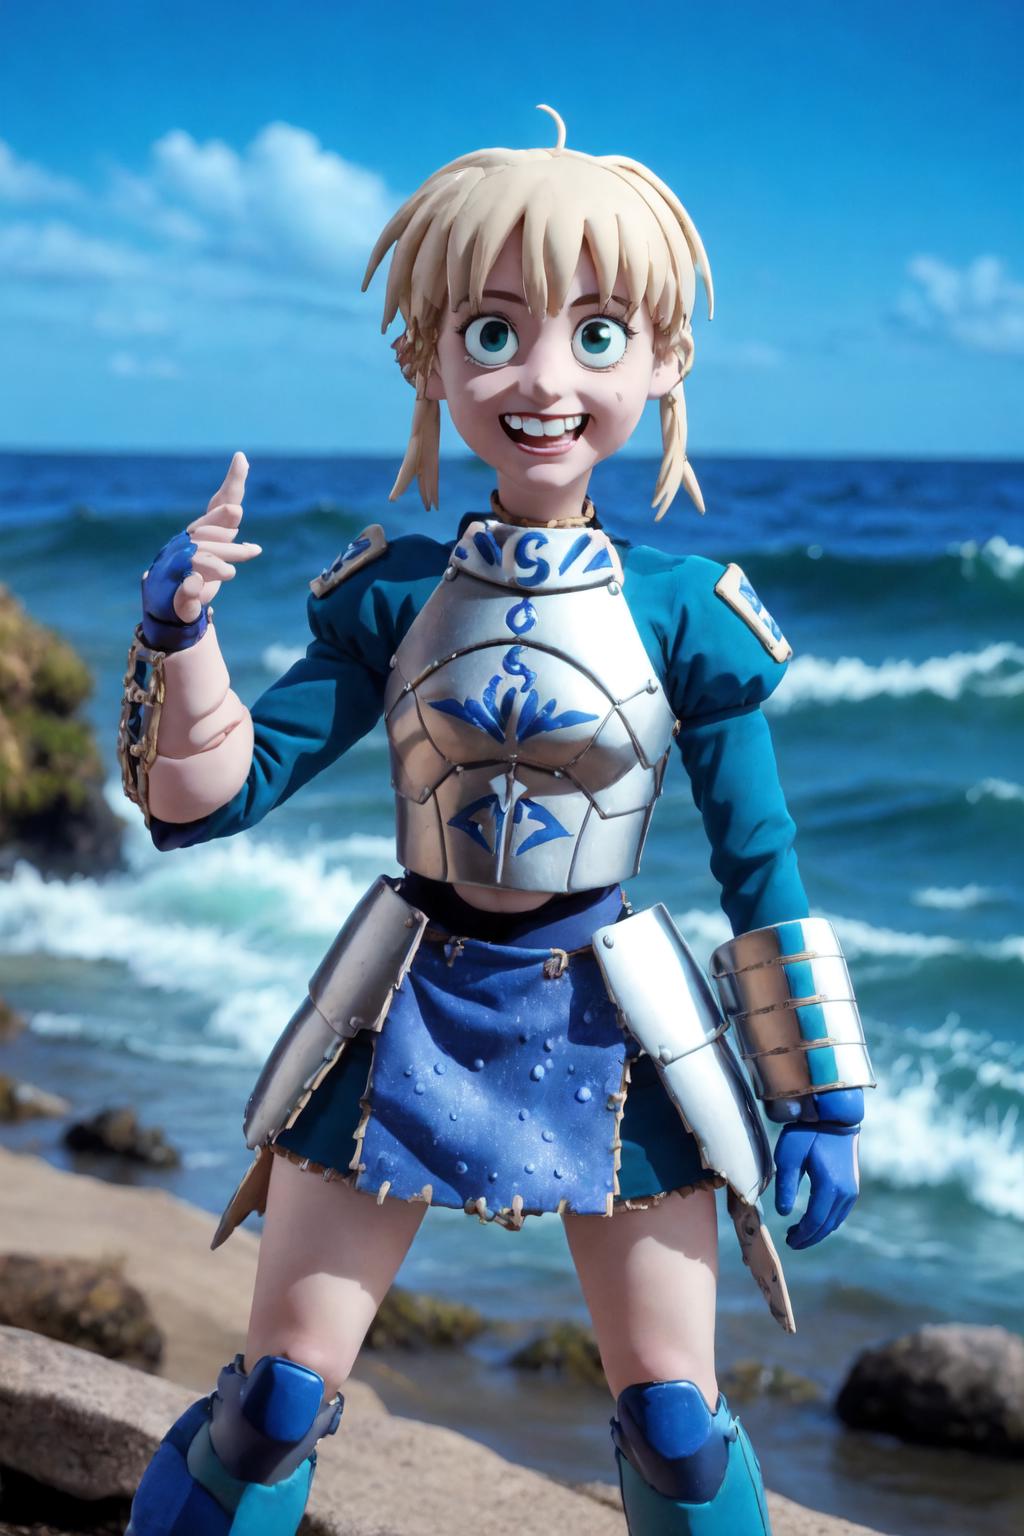 A doll in a blue dress, armor, and blue gloves stands on the beach.